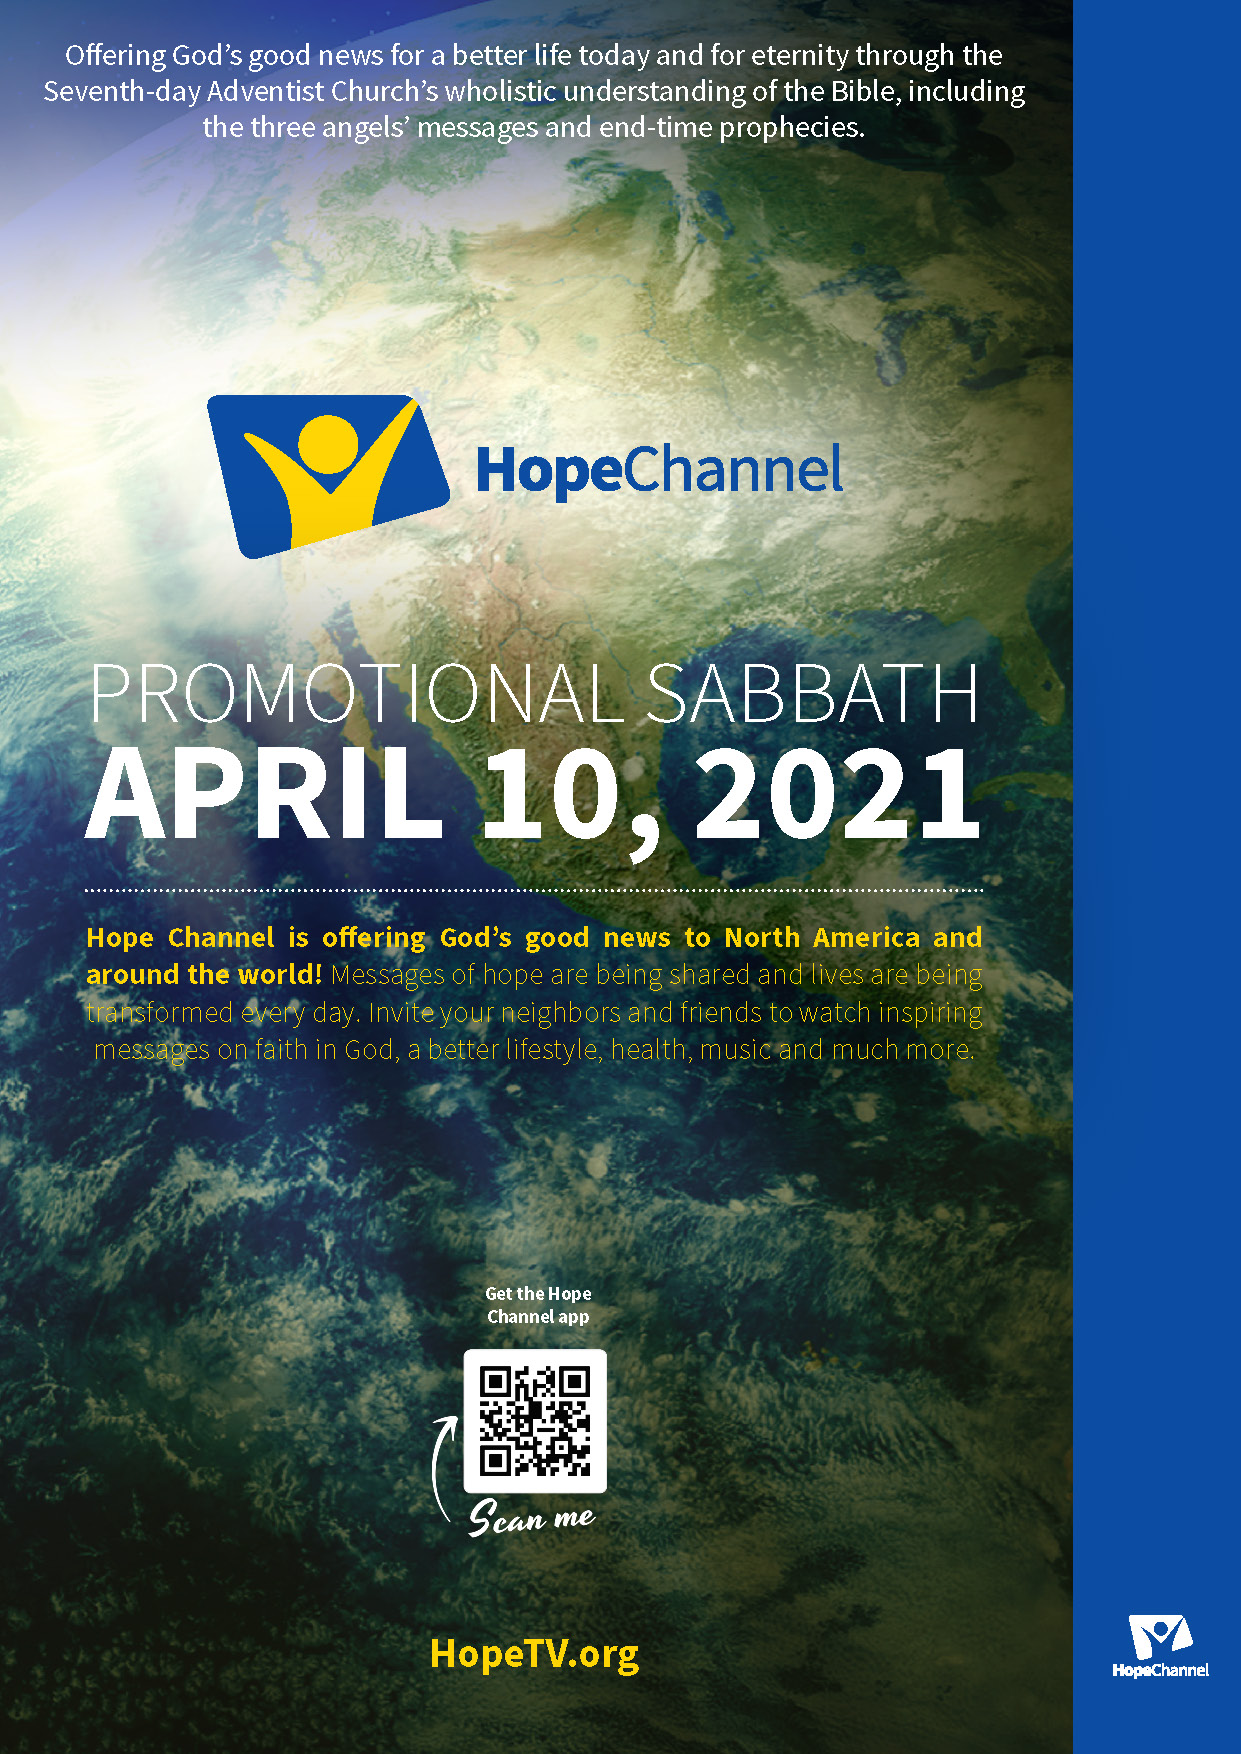 Offering Hope Channel International, Inc. (GC) North American